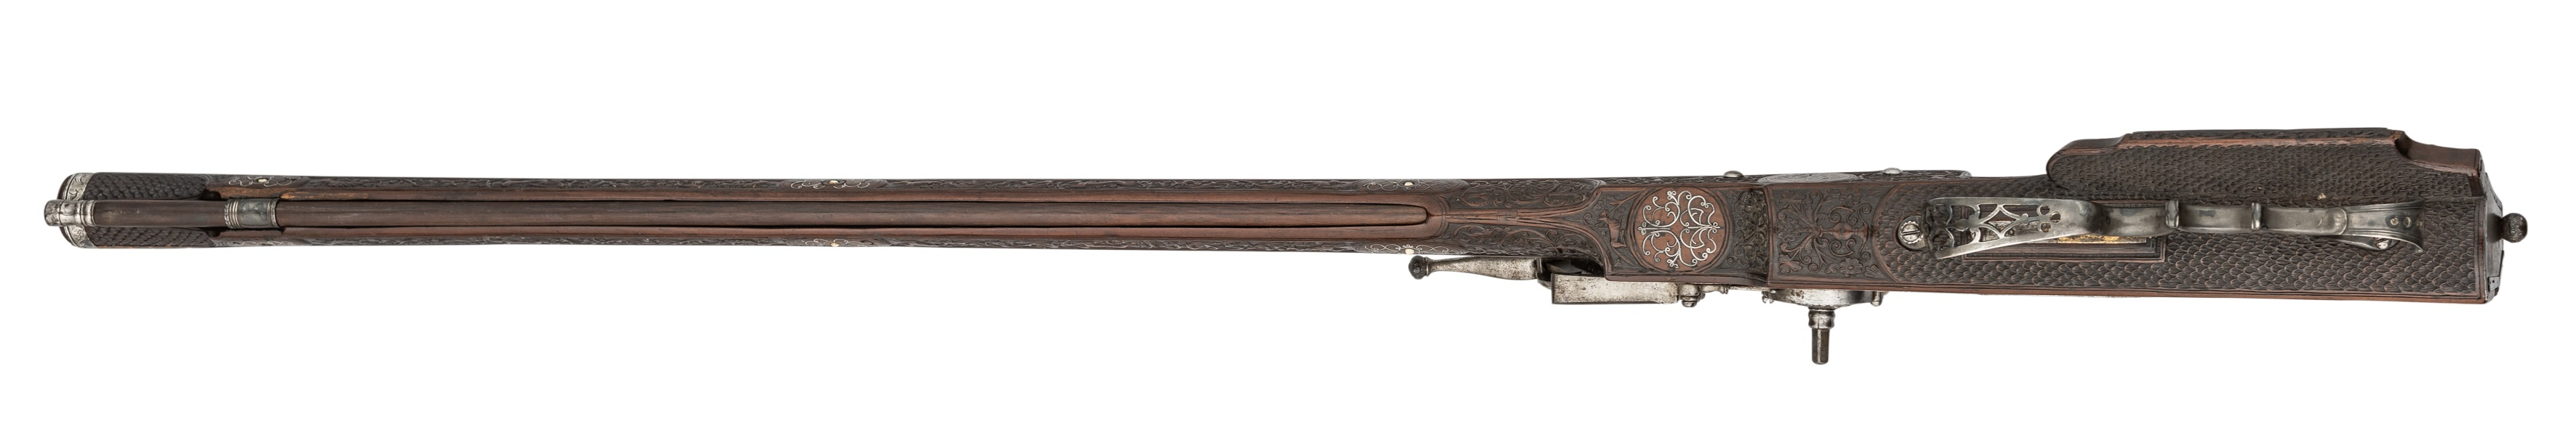 ‡ AN IMPORTANT HIGHLY DECORATED 28 BORE GERMAN WHEEL-LOCK SPORTING RIFLE STOCKED BY THE SO-CALLED - Image 4 of 6